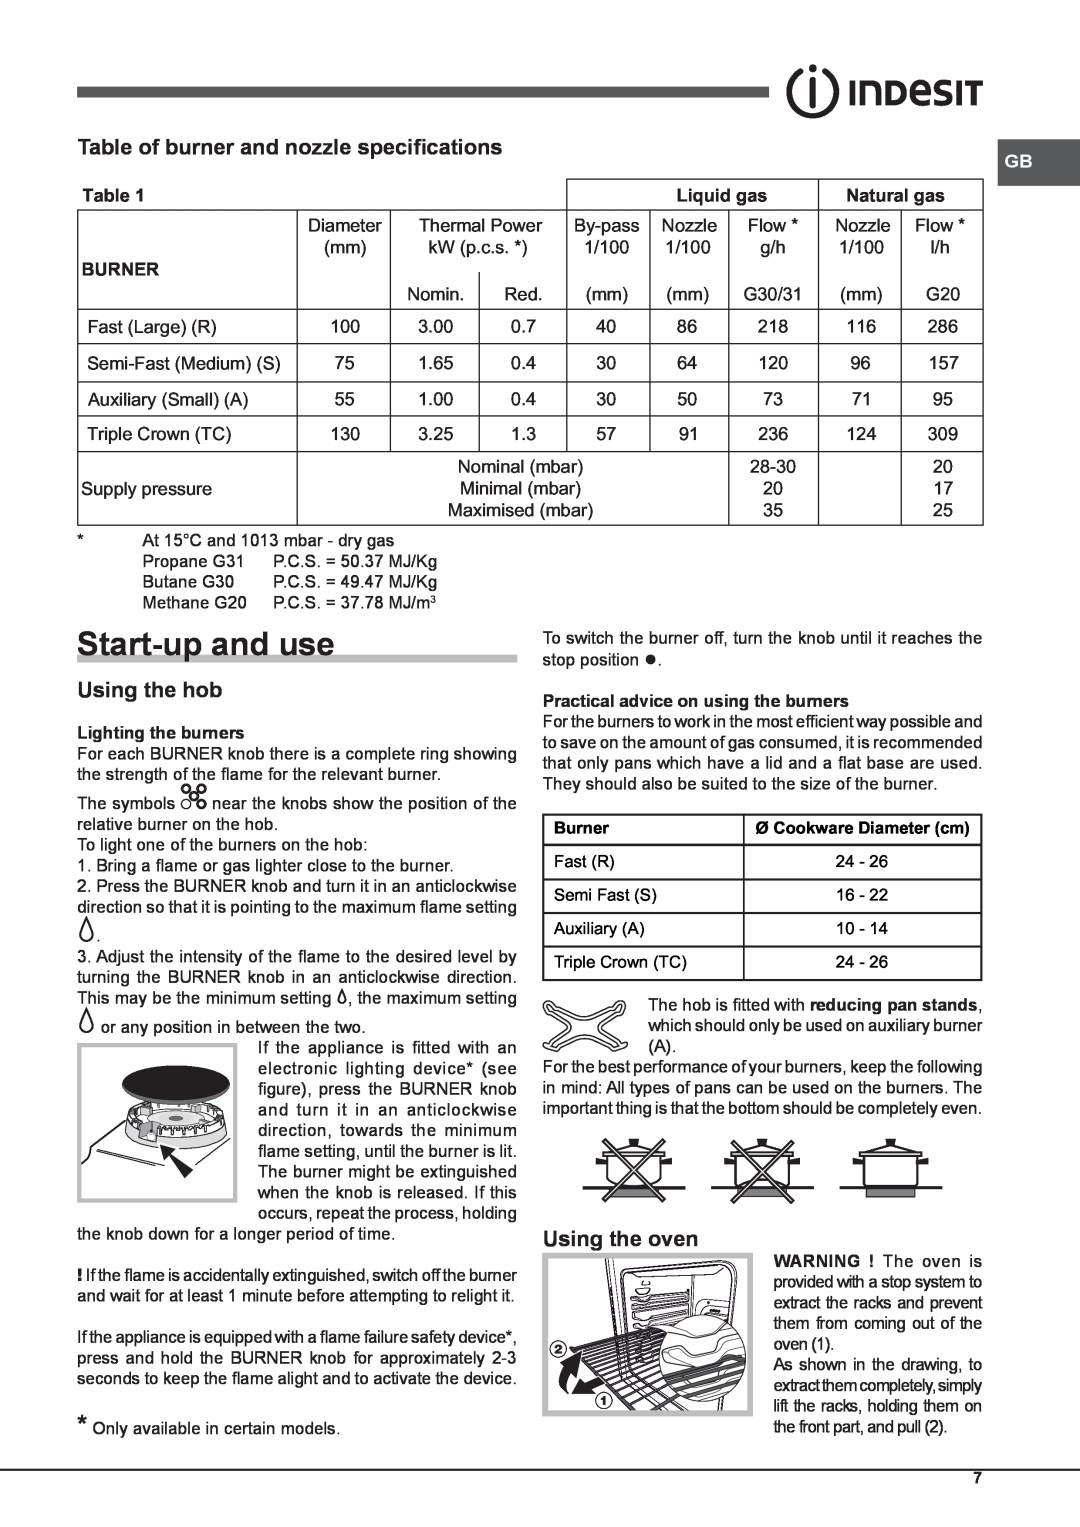 Indesit KP9 F11 S/G S Start-up and use, Table of burner and nozzle specifications, Using the hob, Using the oven, Burner 